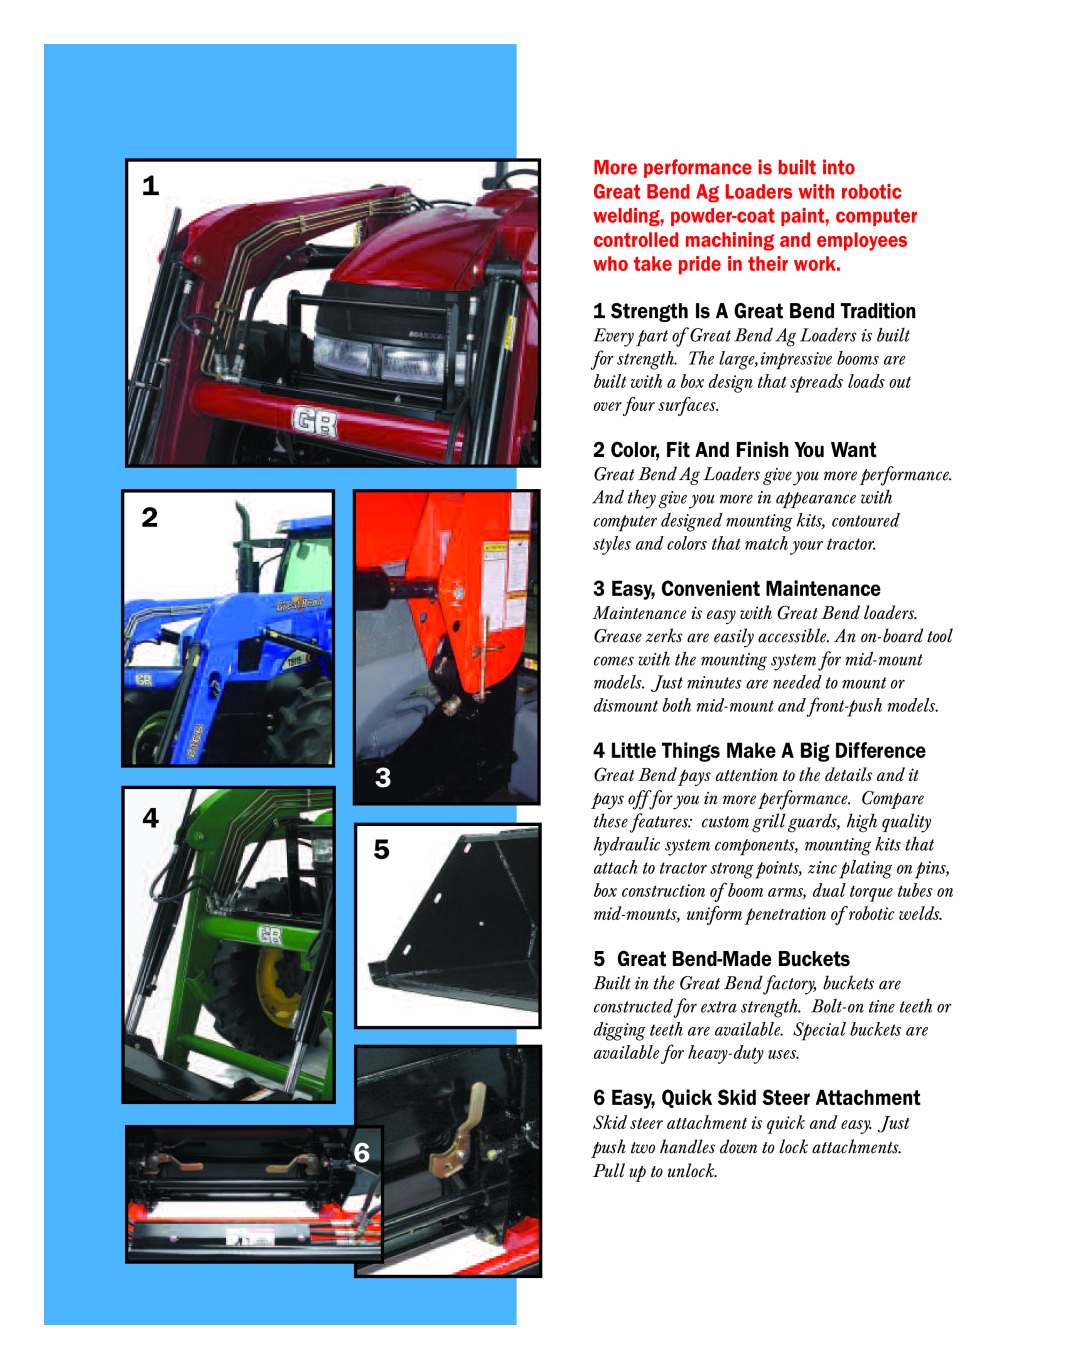 Bush Hog Ag Loader manual Strength Is A Great Bend Tradition, Color, Fit And Finish You Want, Easy, Convenient Maintenance 